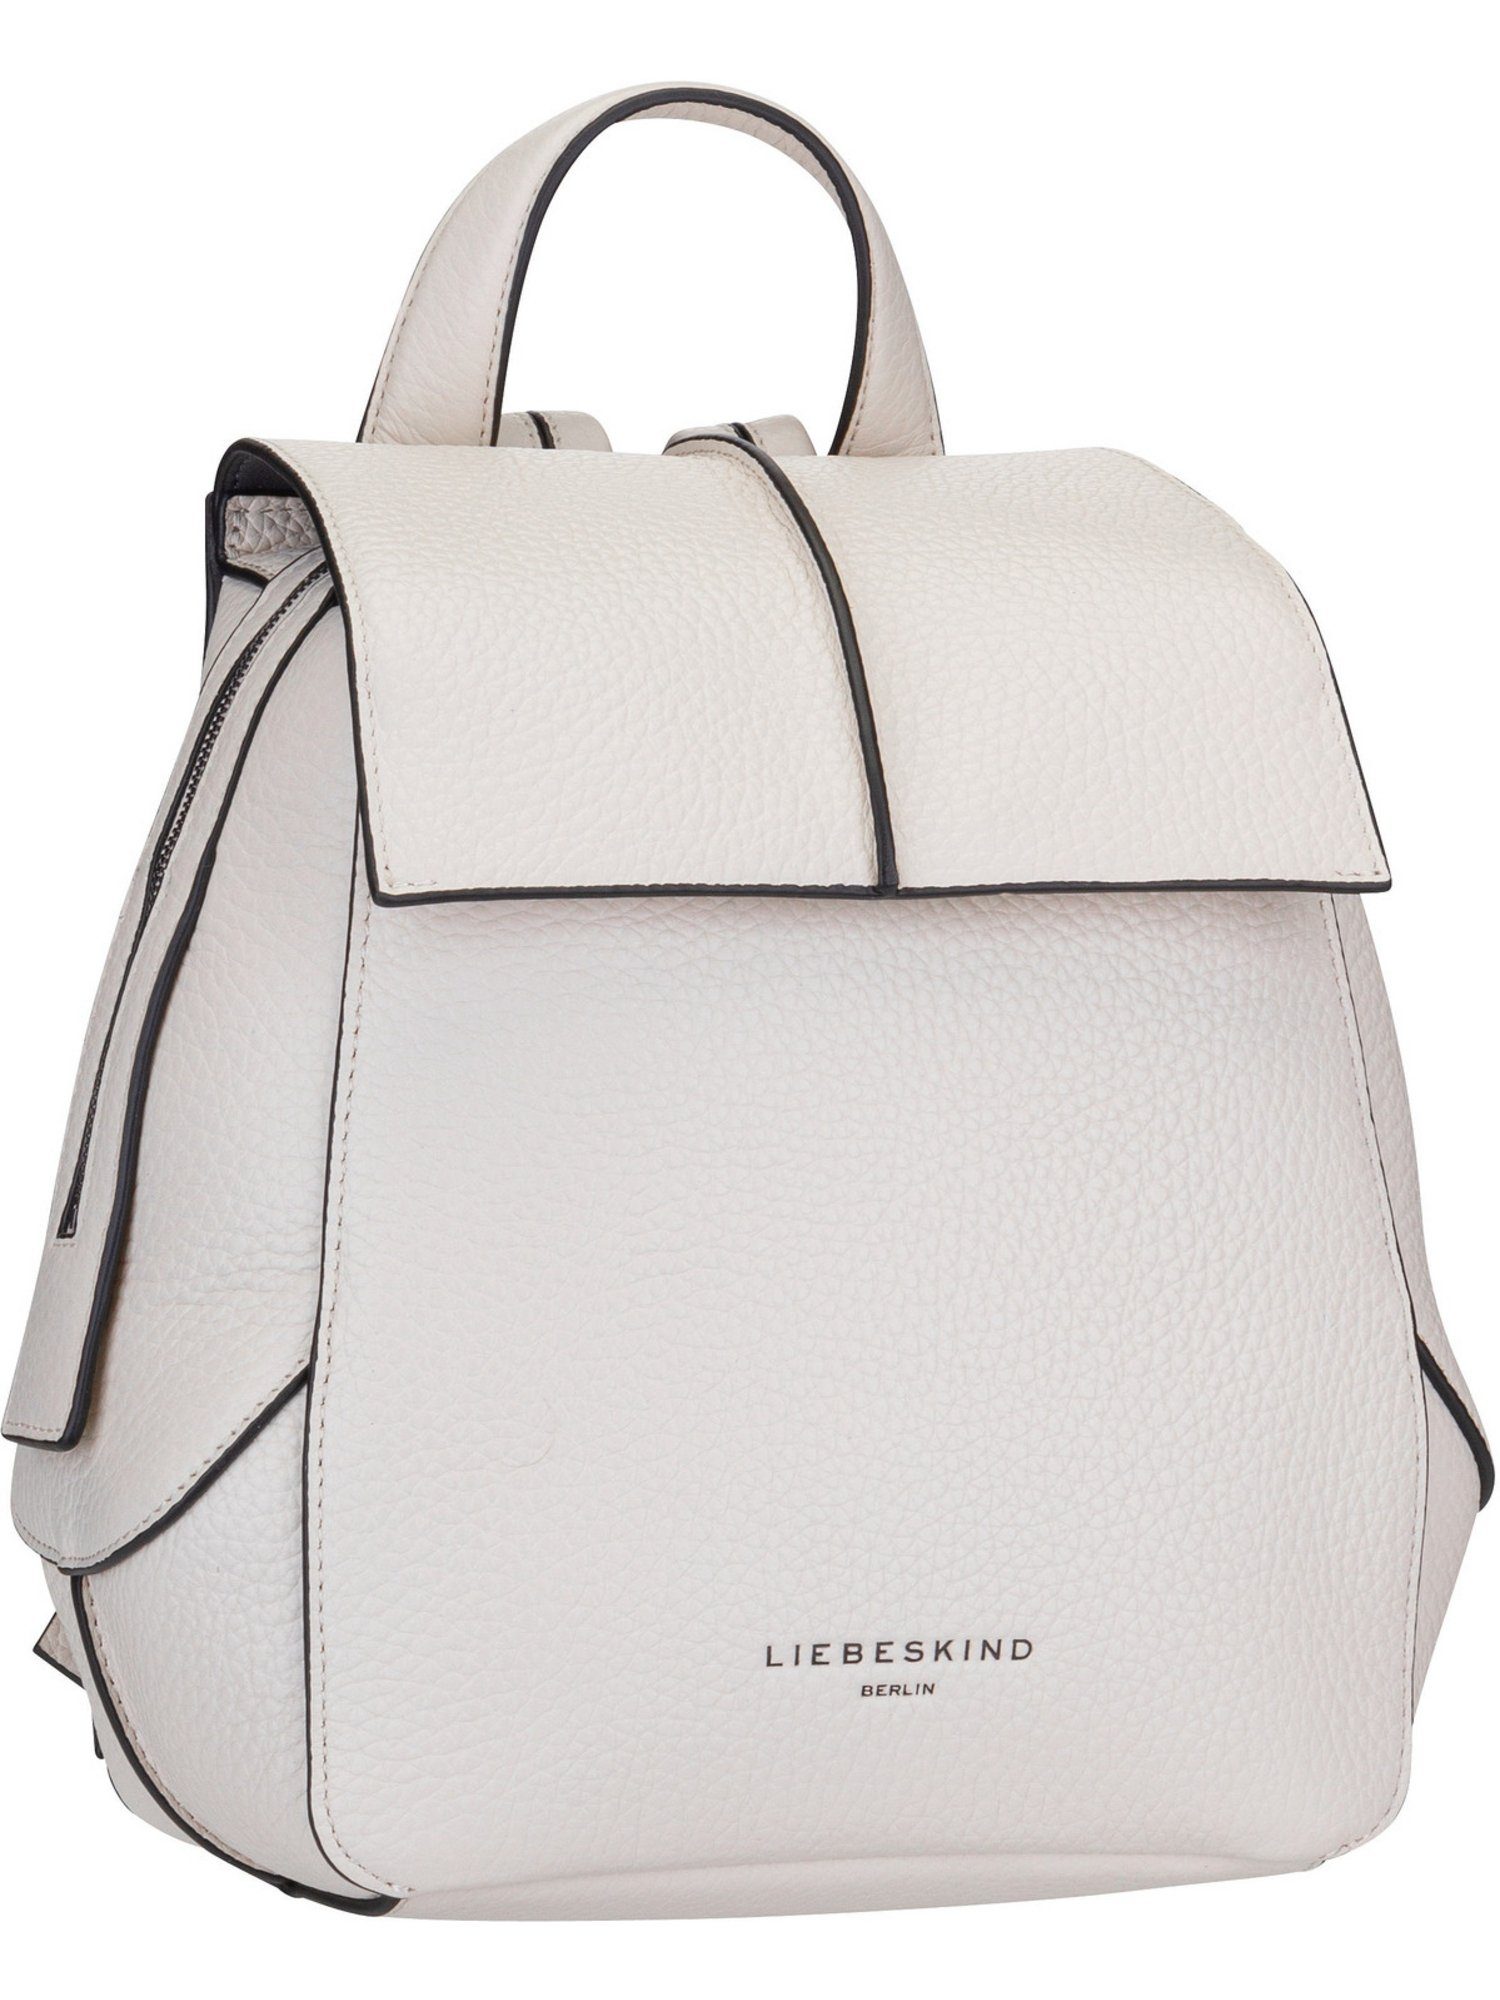 S Backpack Liebeskind Berlin 2 Coconut Rucksack Lilly Pebble